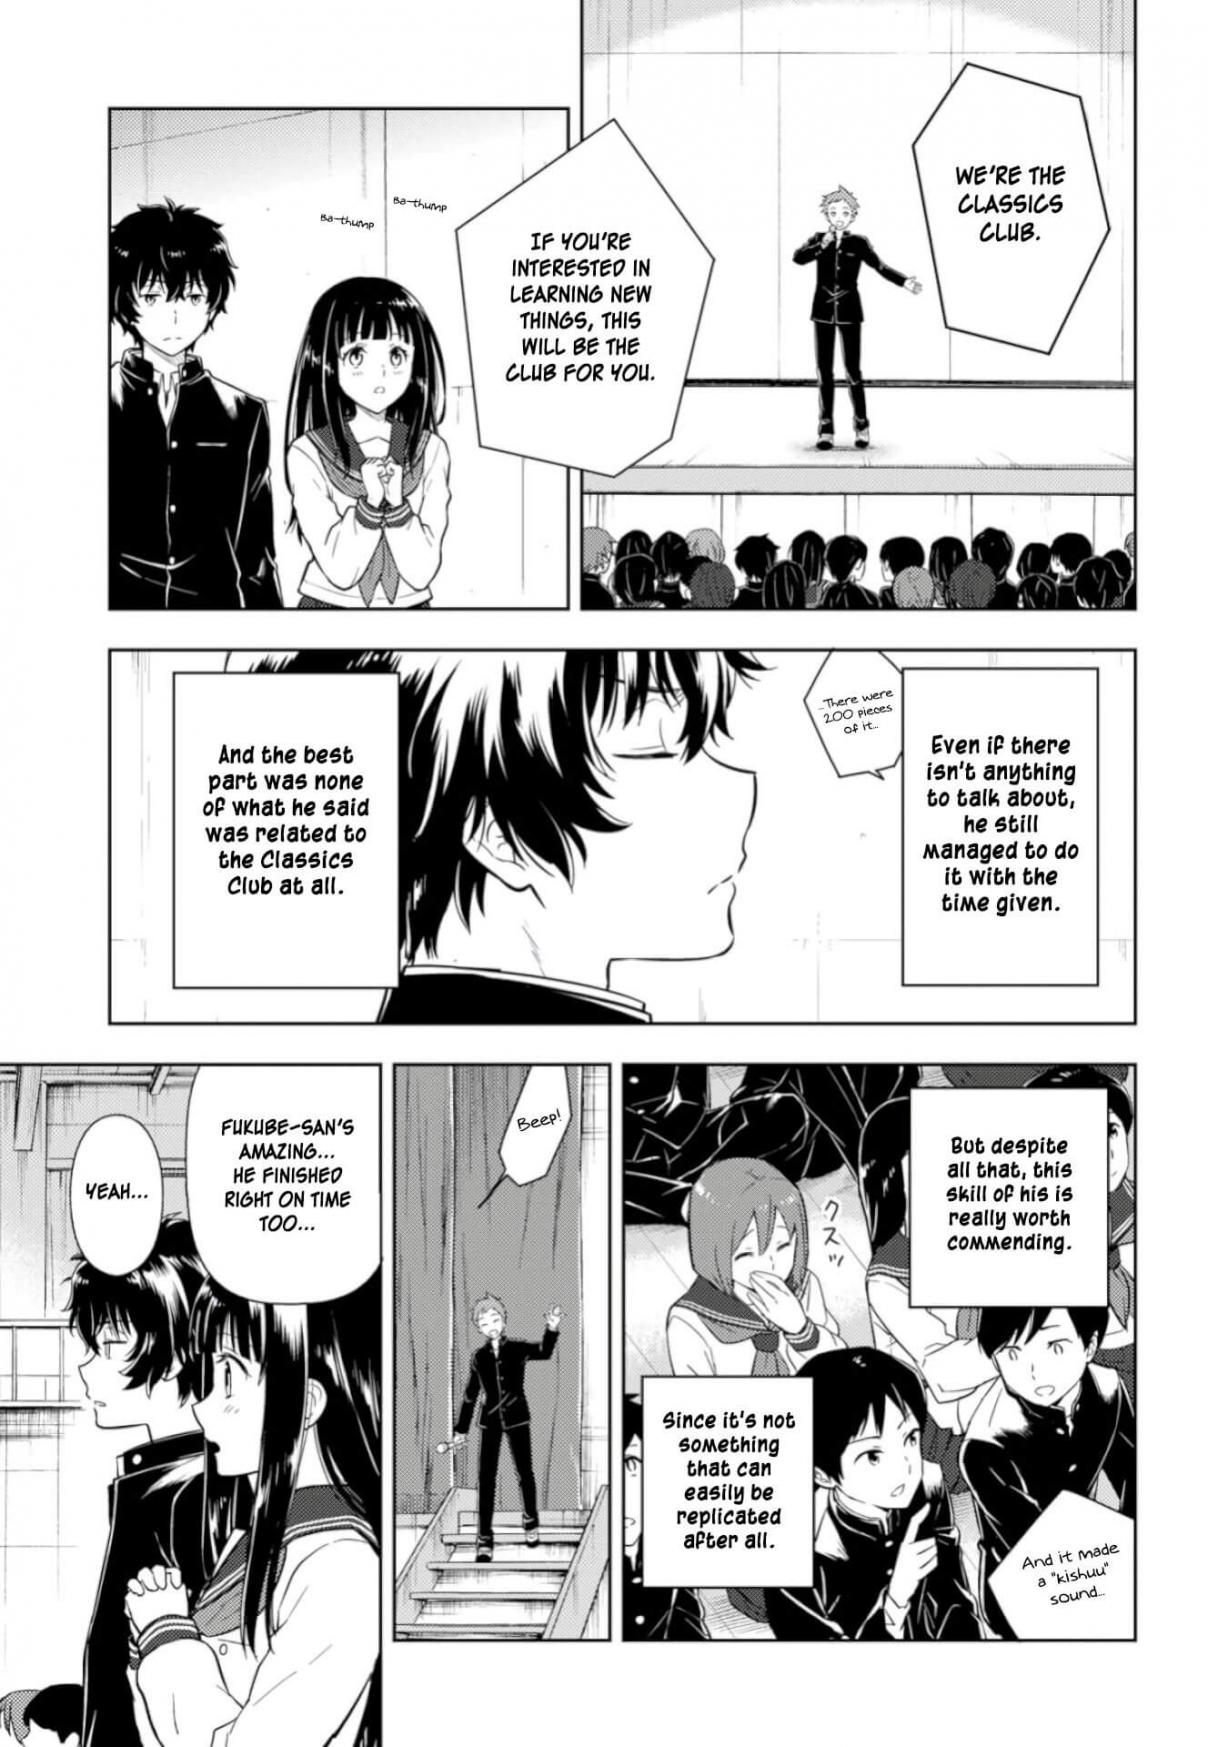 Hyouka Ch. 76 Club Applications Right Over Here! ①